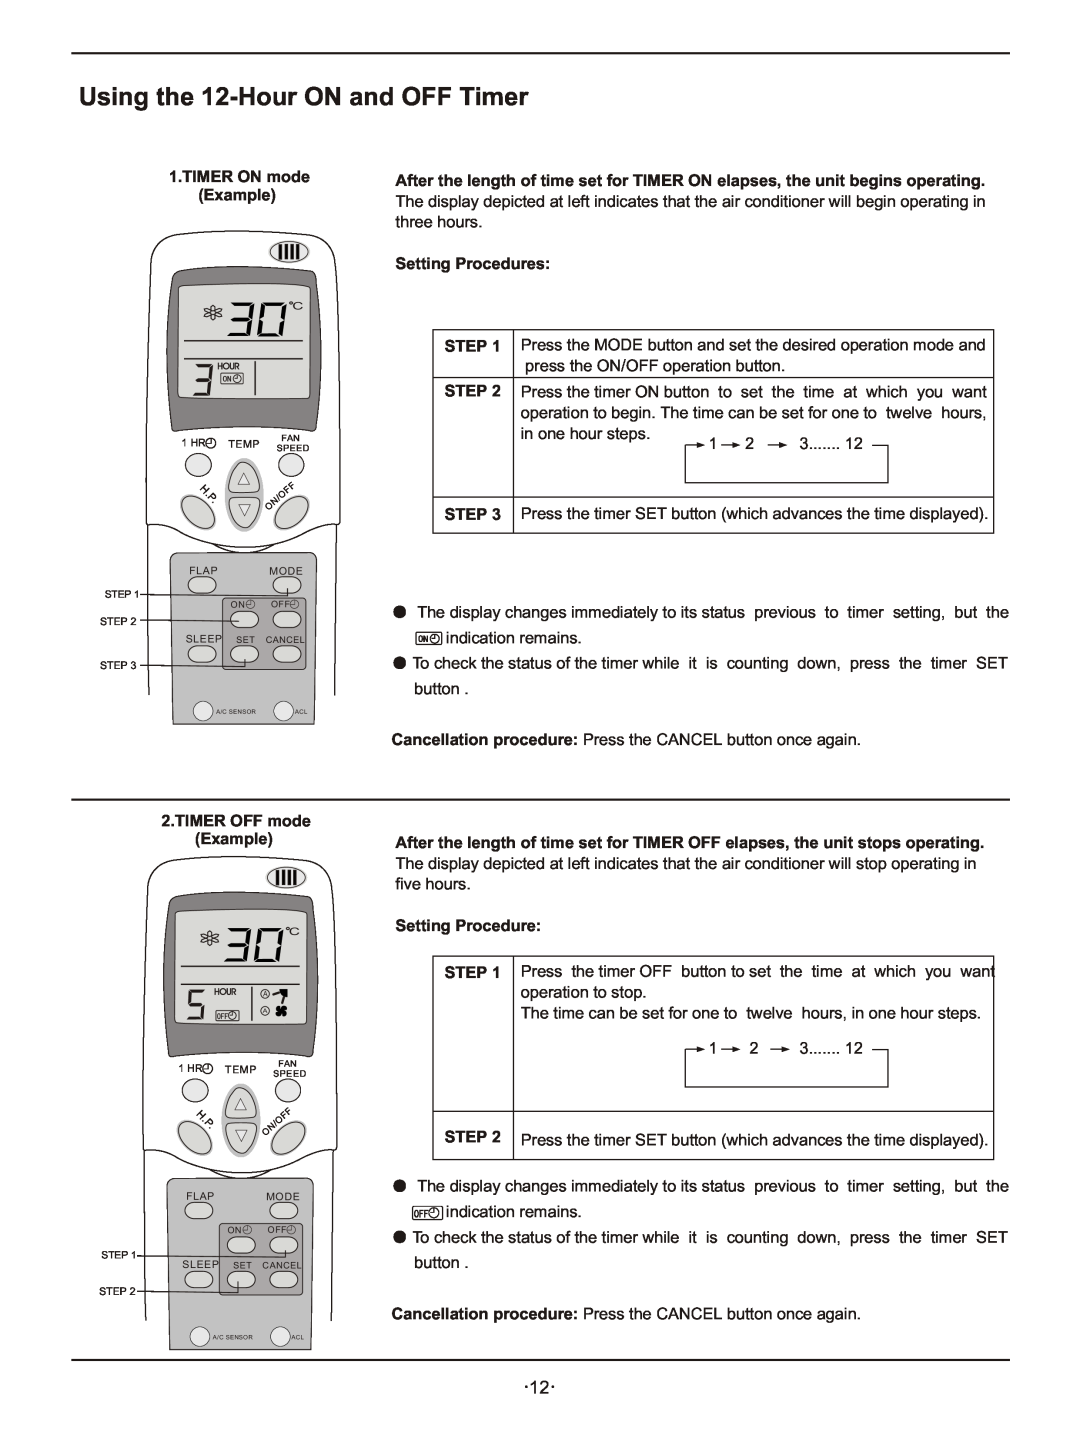 Hisense Group KFR-3208GW Using the 12-HourON and OFF Timer, TIMER ON mode Example, TIMER OFF mode Example, Step 